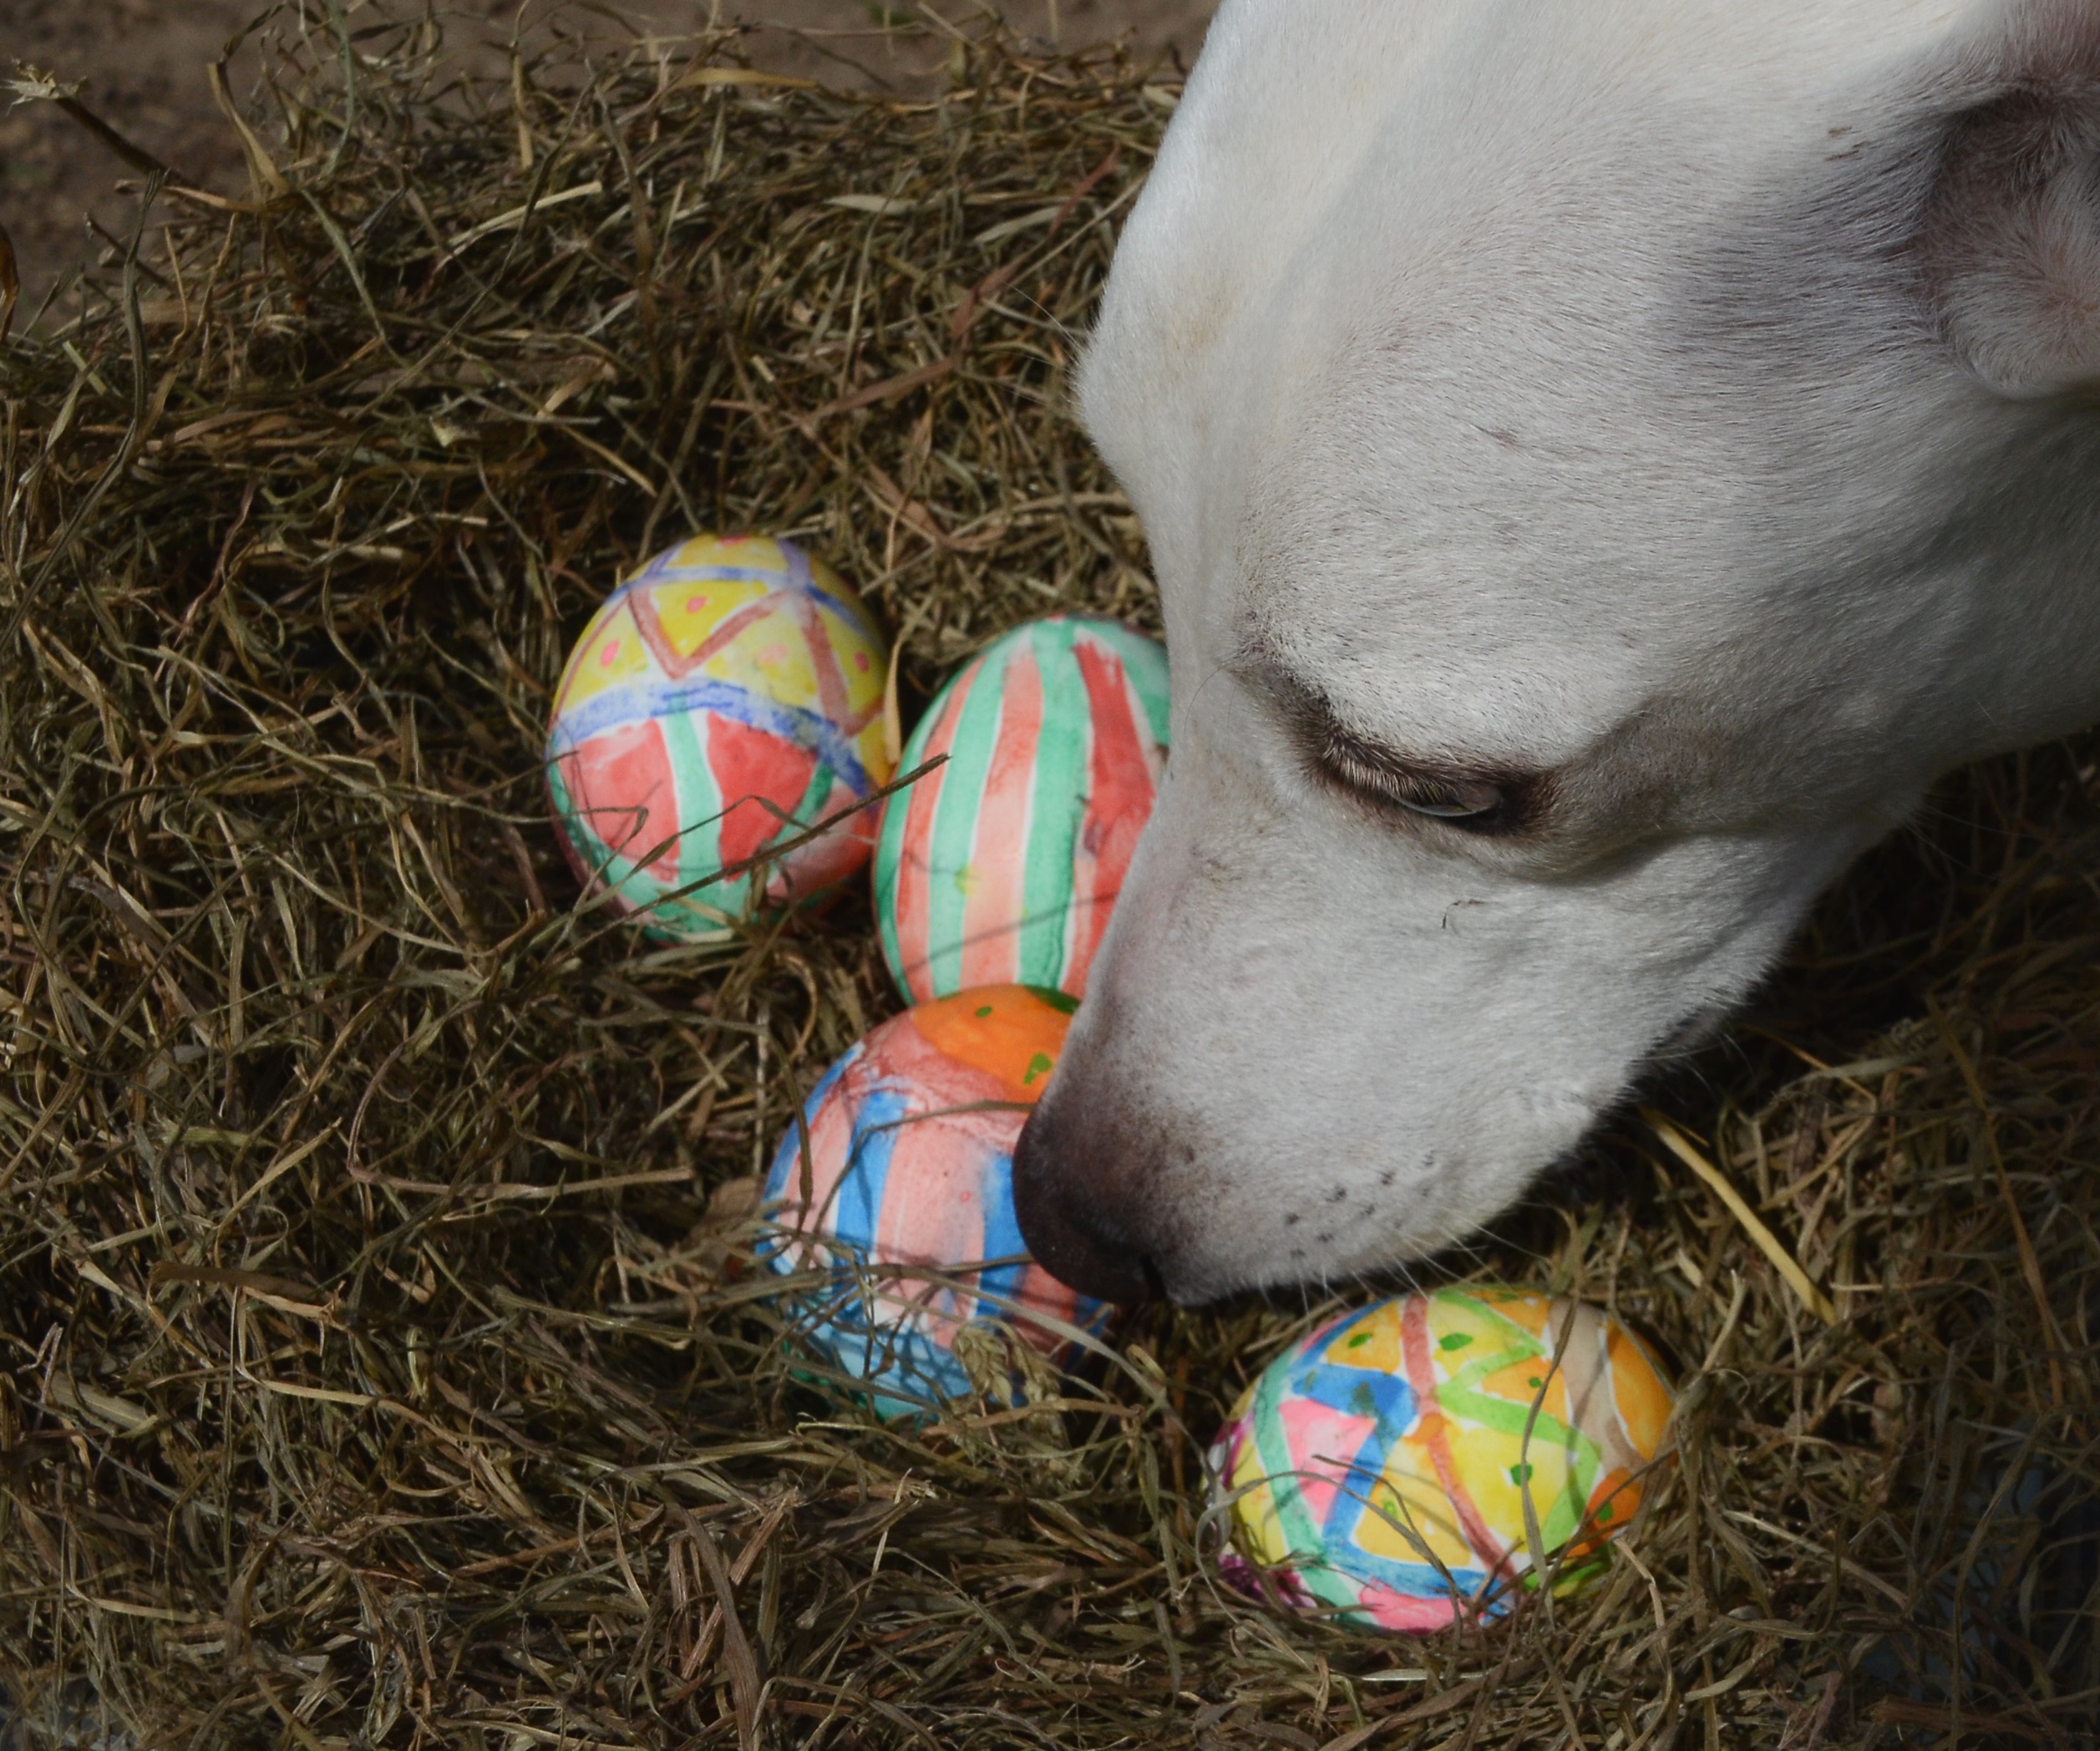 Easter Dog And Puppy Pictures